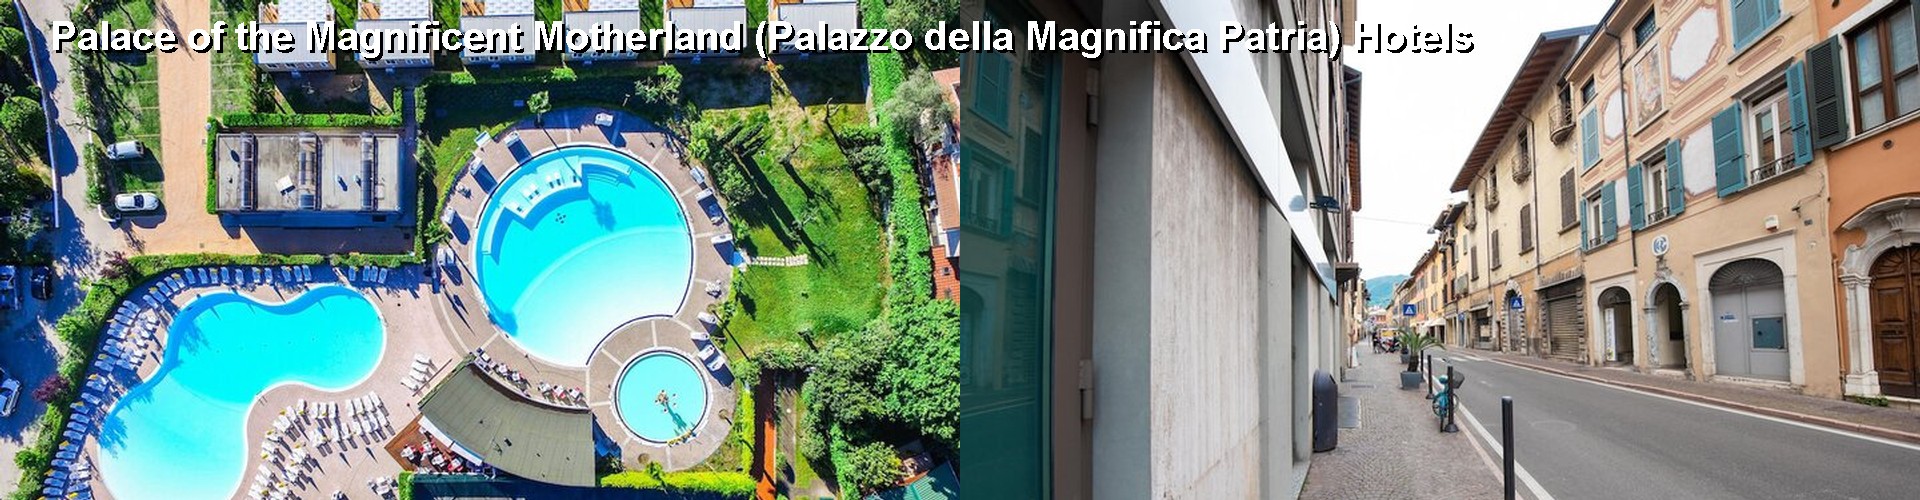 5 Best Hotels near Palace of the Magnificent Motherland (Palazzo della Magnifica Patria)